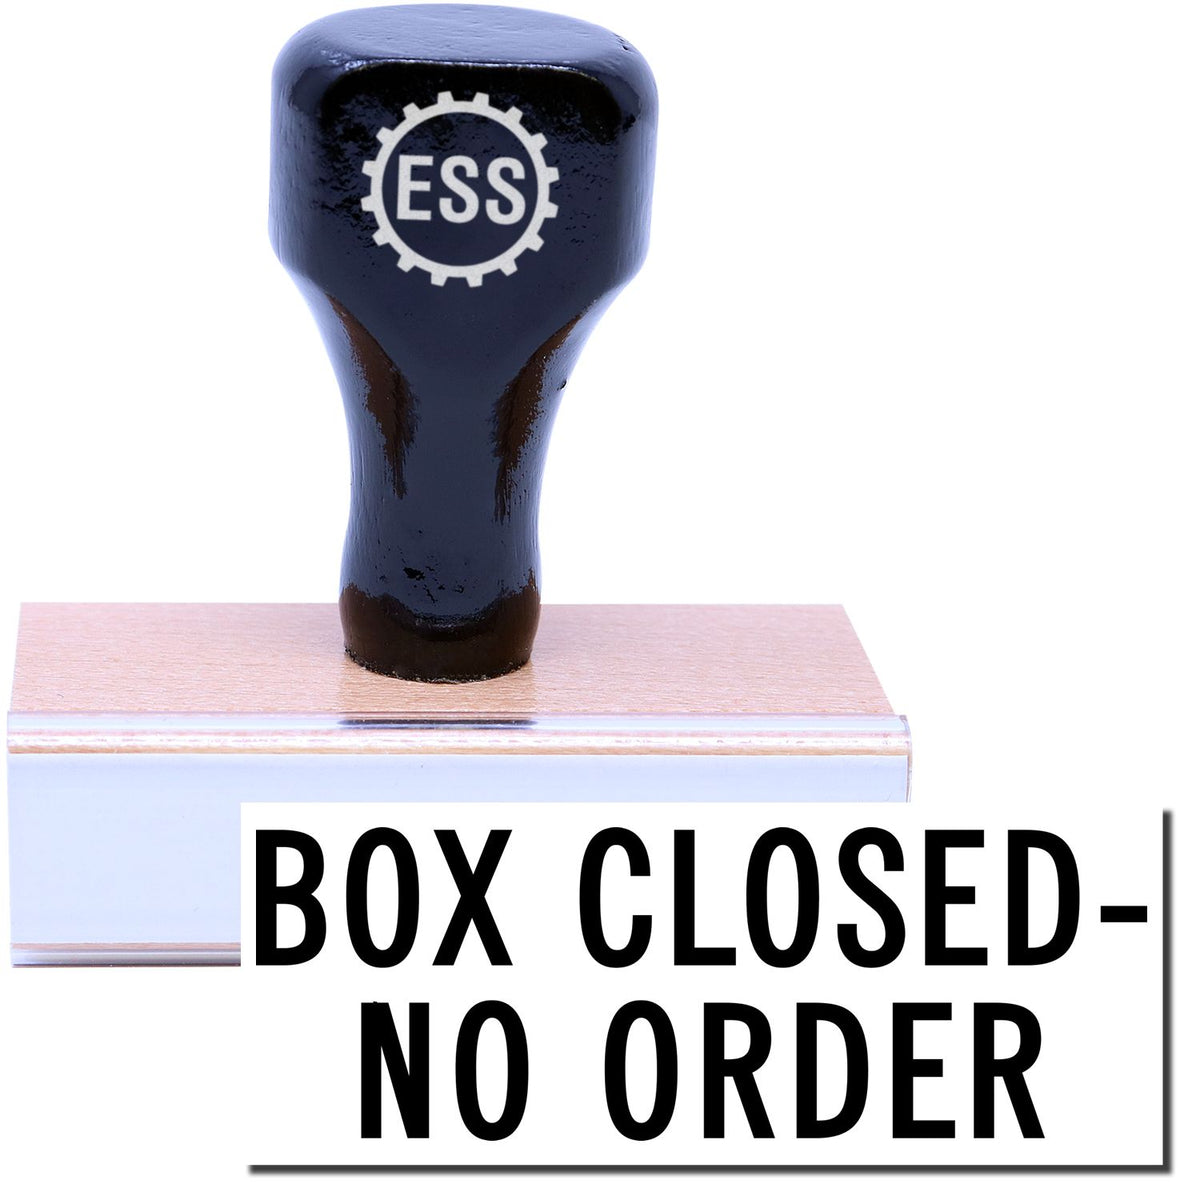 A stock office rubber stamp with a stamped image showing how the text &quot;BOX CLOSED - NO ORDER&quot; in a large font is displayed after stamping.